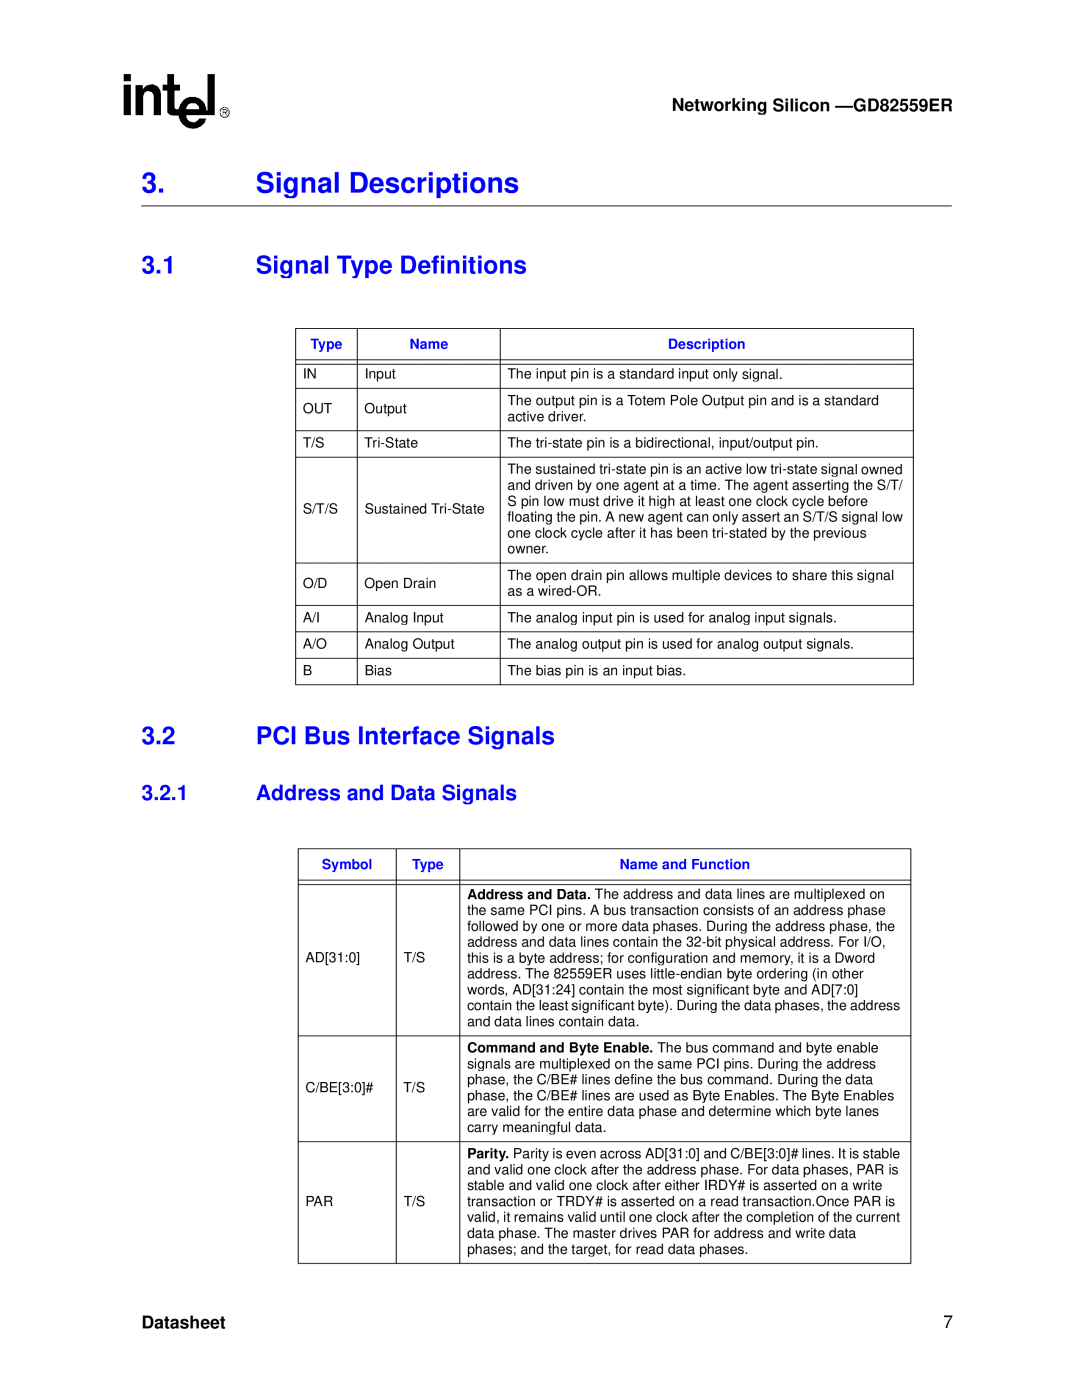 Intel GD82559ER manual Signal Descriptions, Signal Type Definitions, PCI Bus Interface Signals, Address and Data Signals 